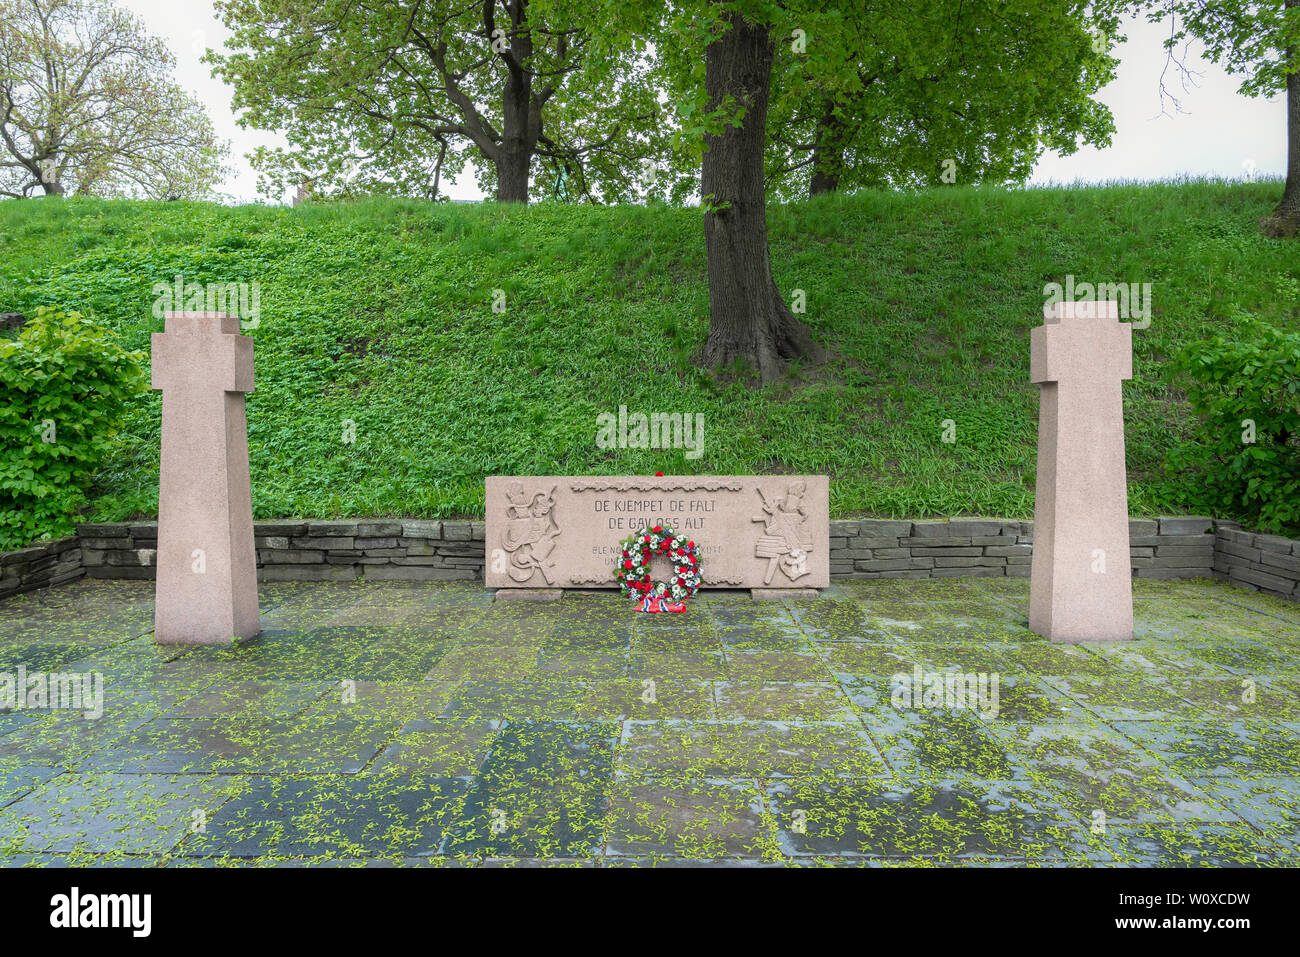 Oslo War Memorial, view of memorial to Norwegian resistance fighters at the Akerhus rampart wall where they were execued by Nazi occupation forces. Stock Photo